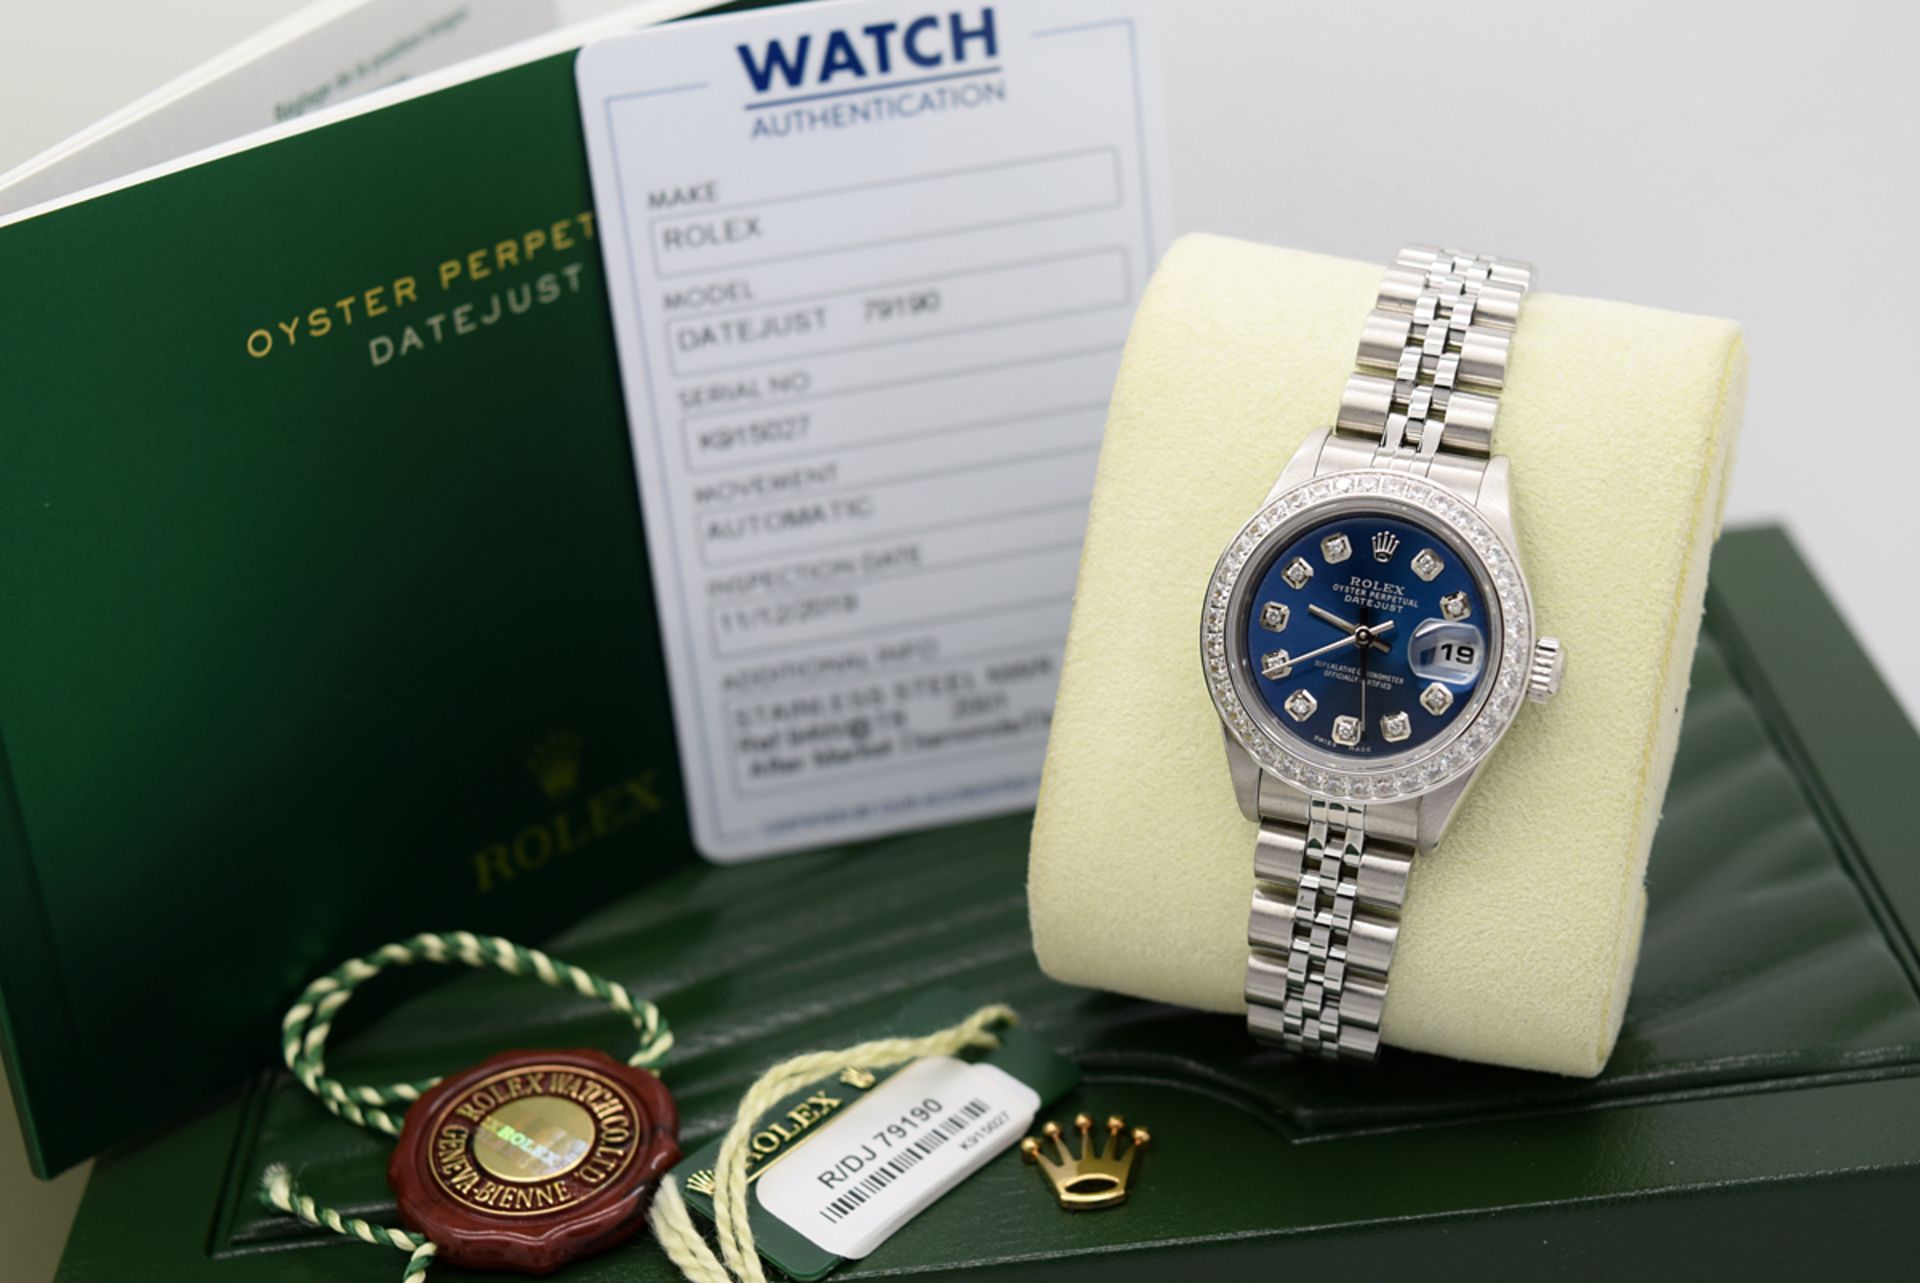 Ladies Rolex Datejust 26mm (Navy Blue Diamond Dial) with Boxset and Authenticity Card - Image 5 of 11